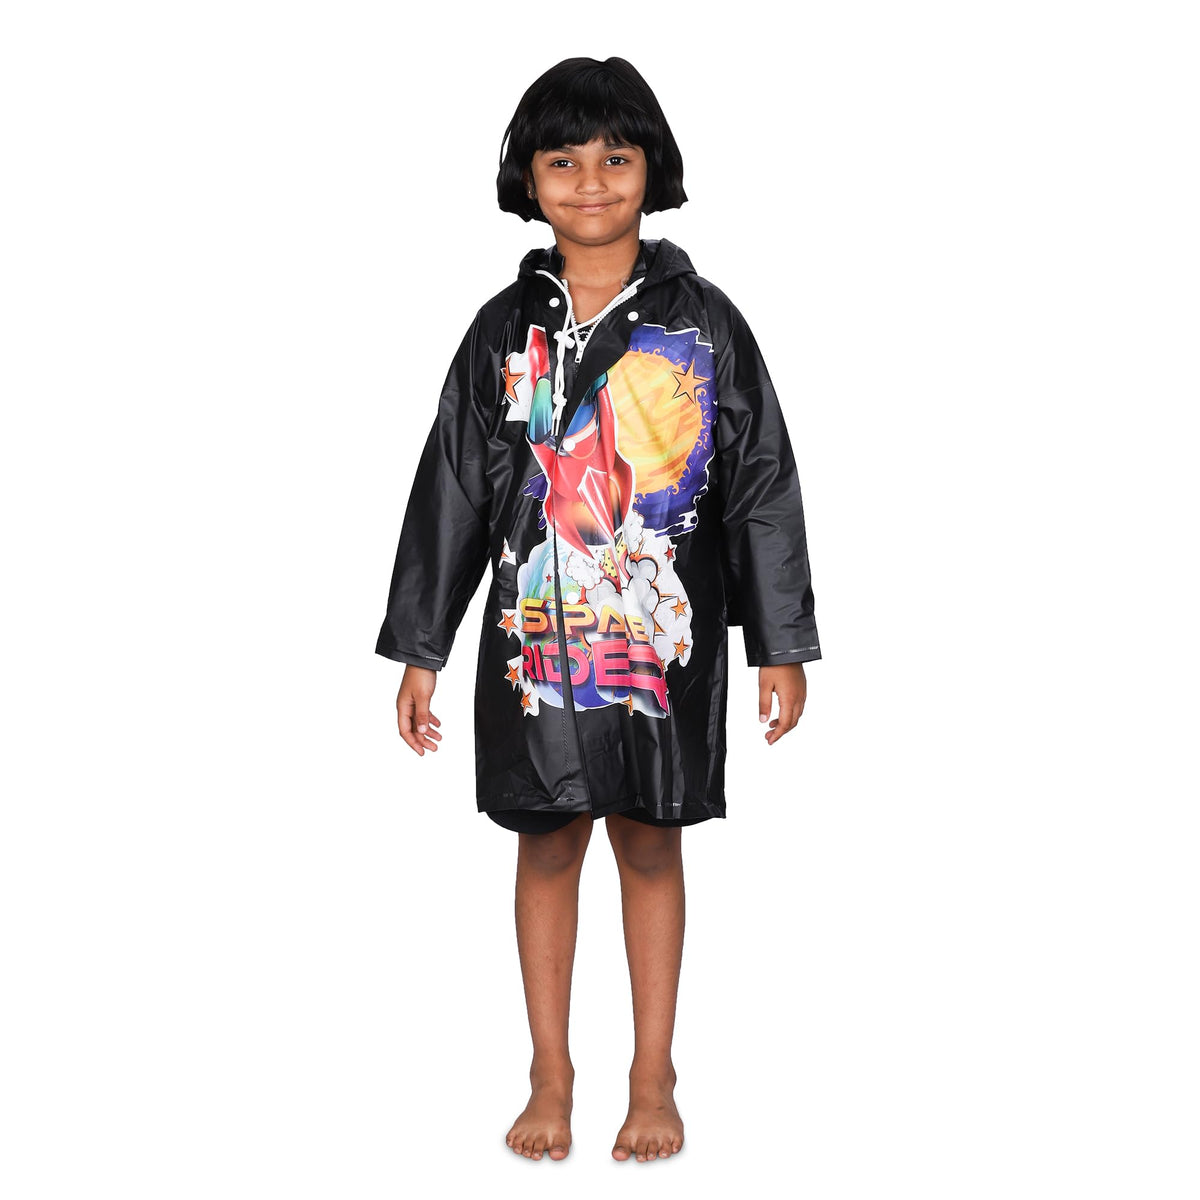 THE CLOWNFISH Toon Caper Series Kids Waterproof PVC Longcoat with Adjustable Hood & Extra Space for Backpack/Schoolbag Holding. Printed Plastic Pouch. Kid Age-4-5 years (Jet Black)